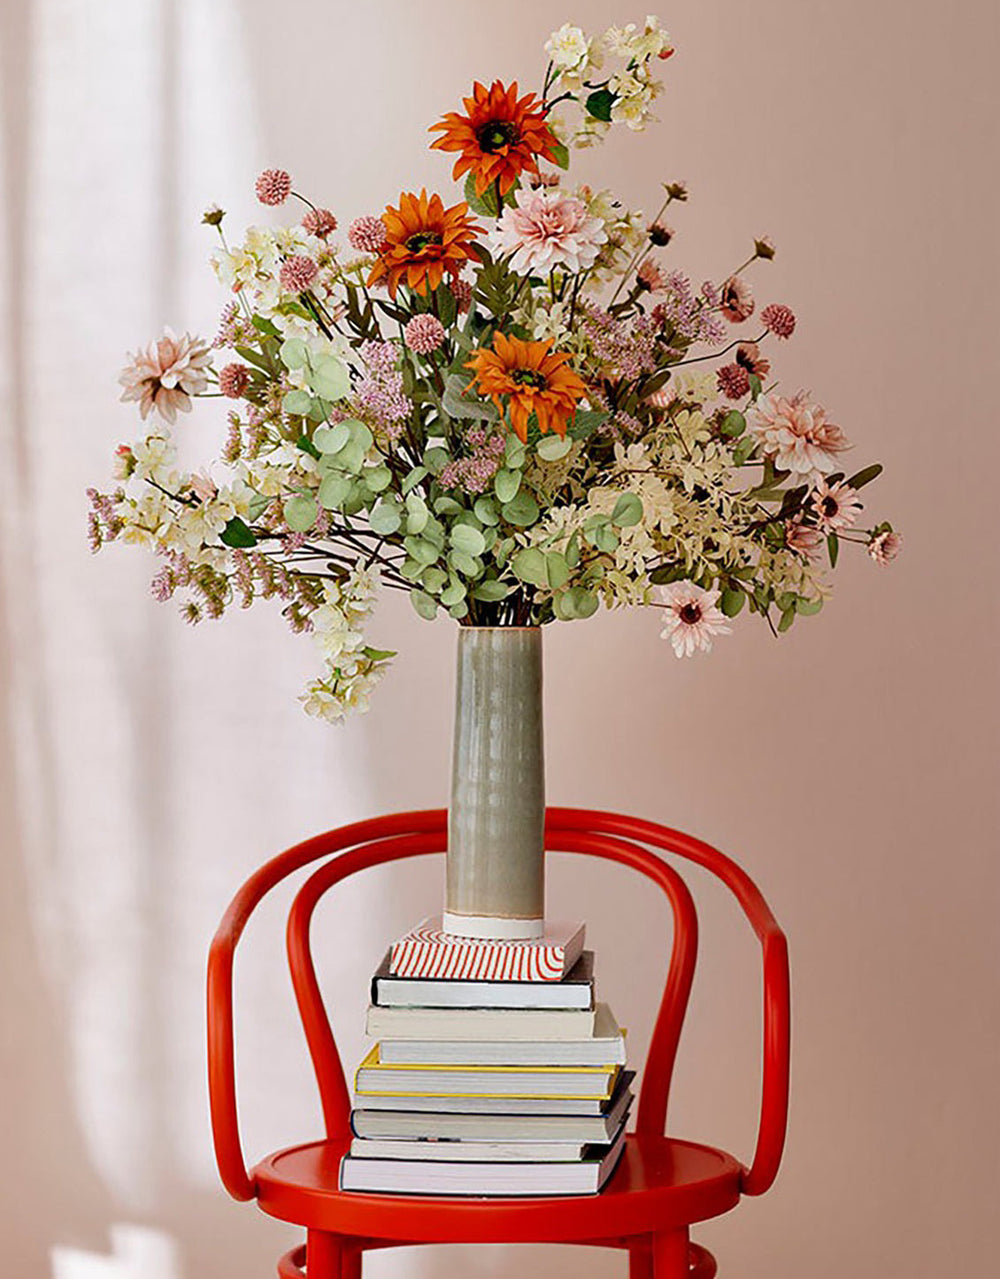 A vase of faux flowers sitting on a stack of books on a chair.